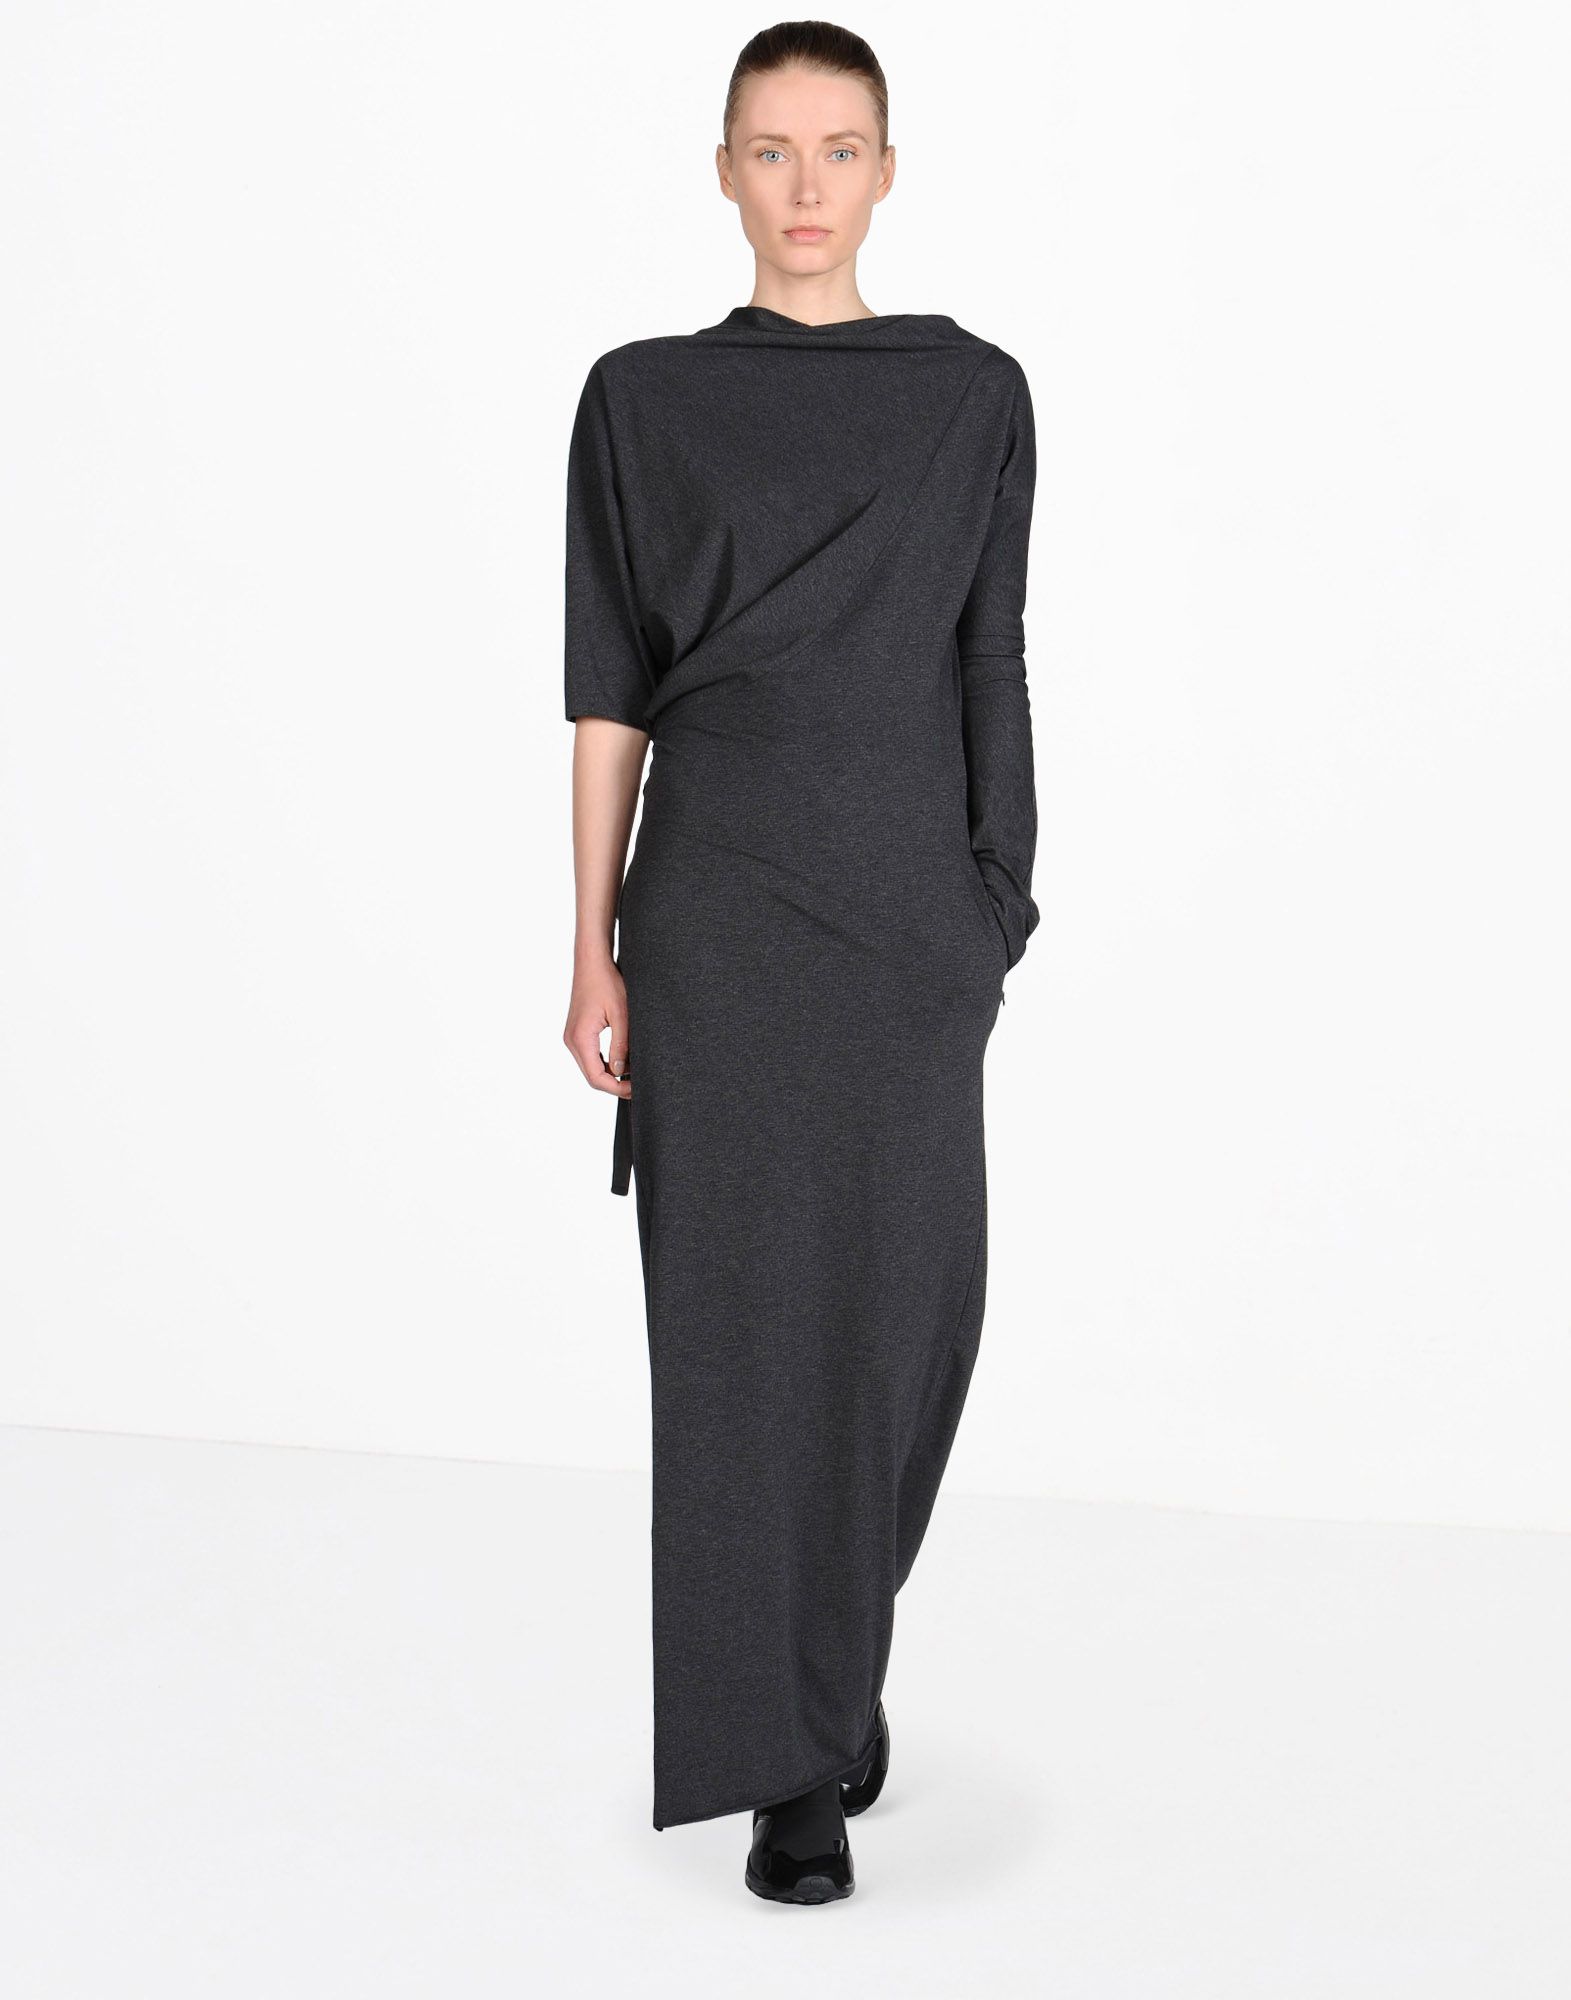 Y 3 VERSA LONG DRESS for Women | Adidas Y-3 Official Store